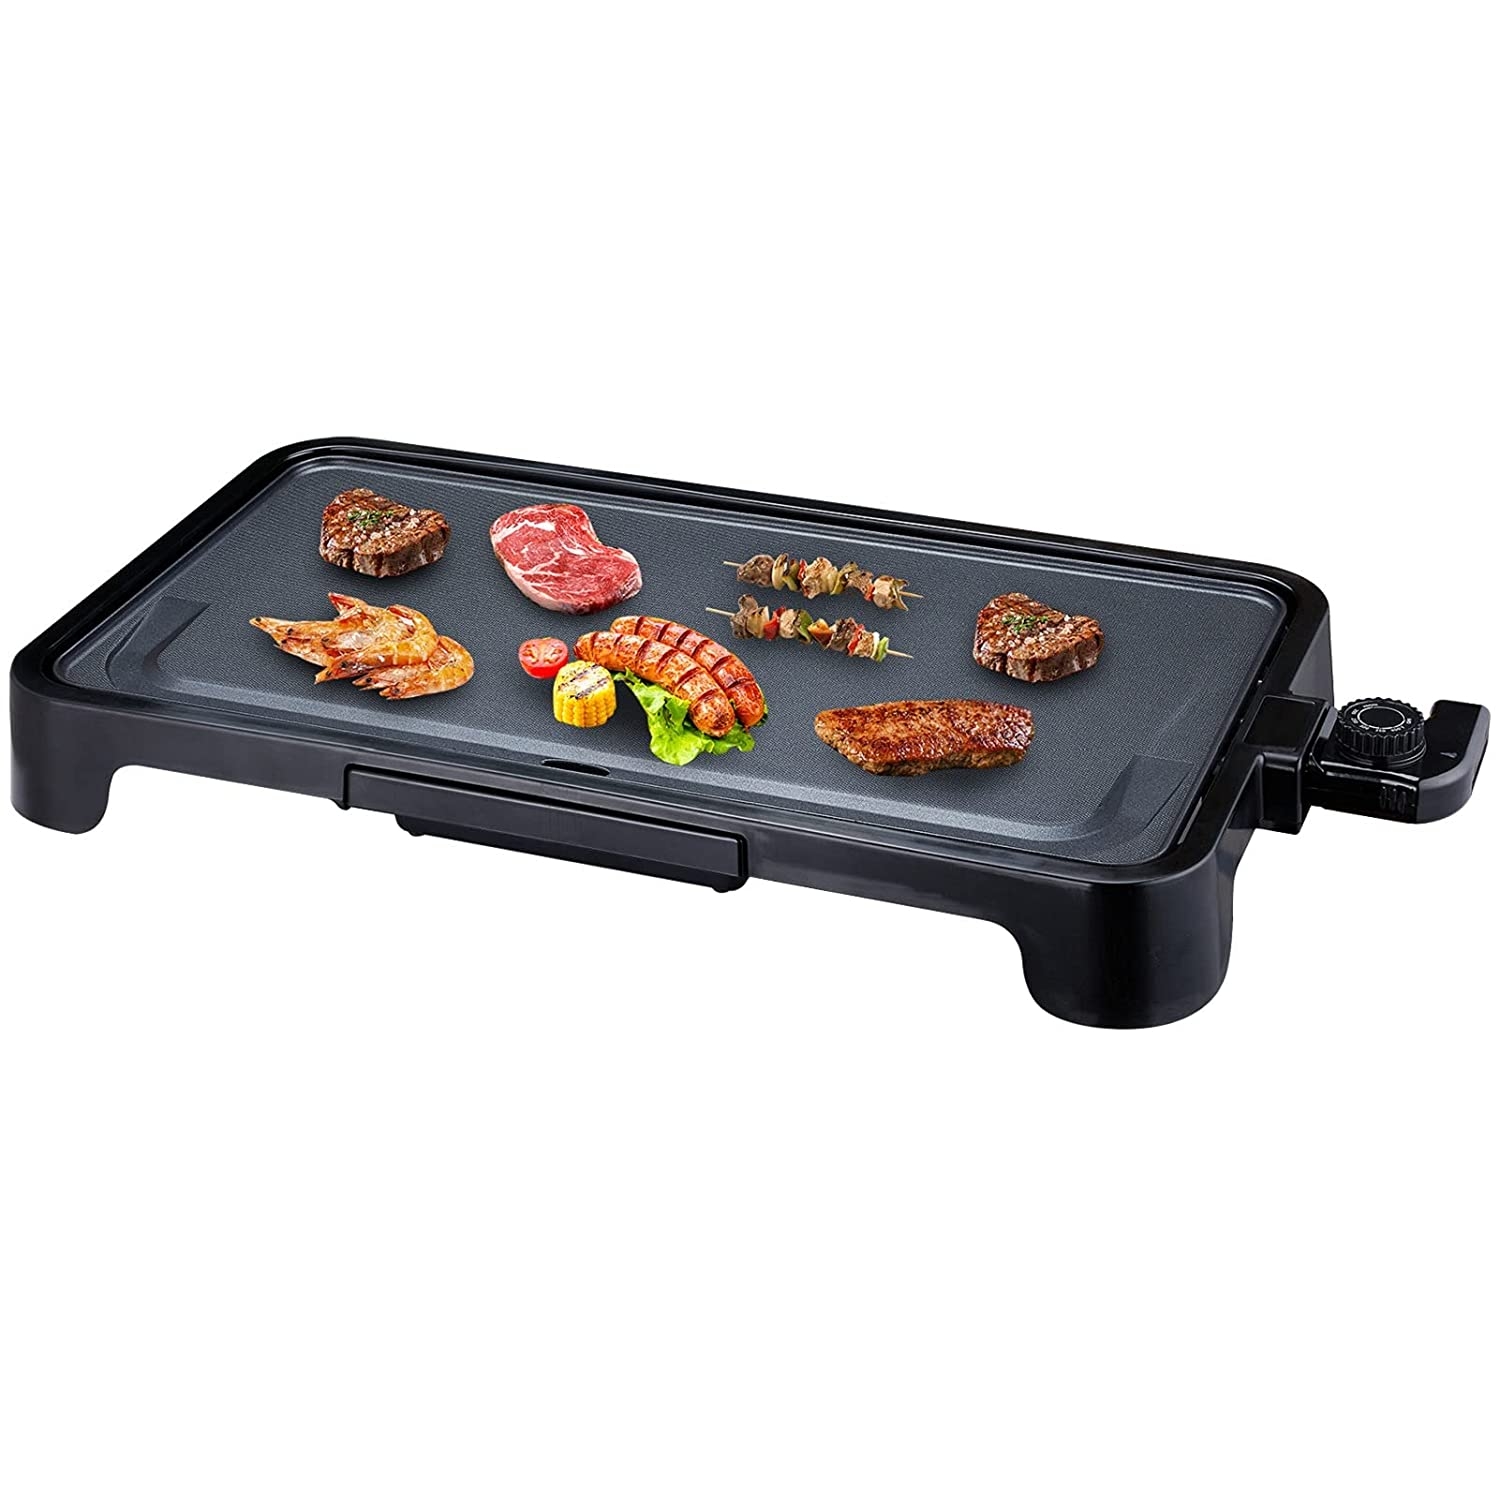 ALES H1001 Everyday Nonstick Electric Griddle, 1500W Pancake Griddle Indoor BBQ Grill Party Smokeless Griddle